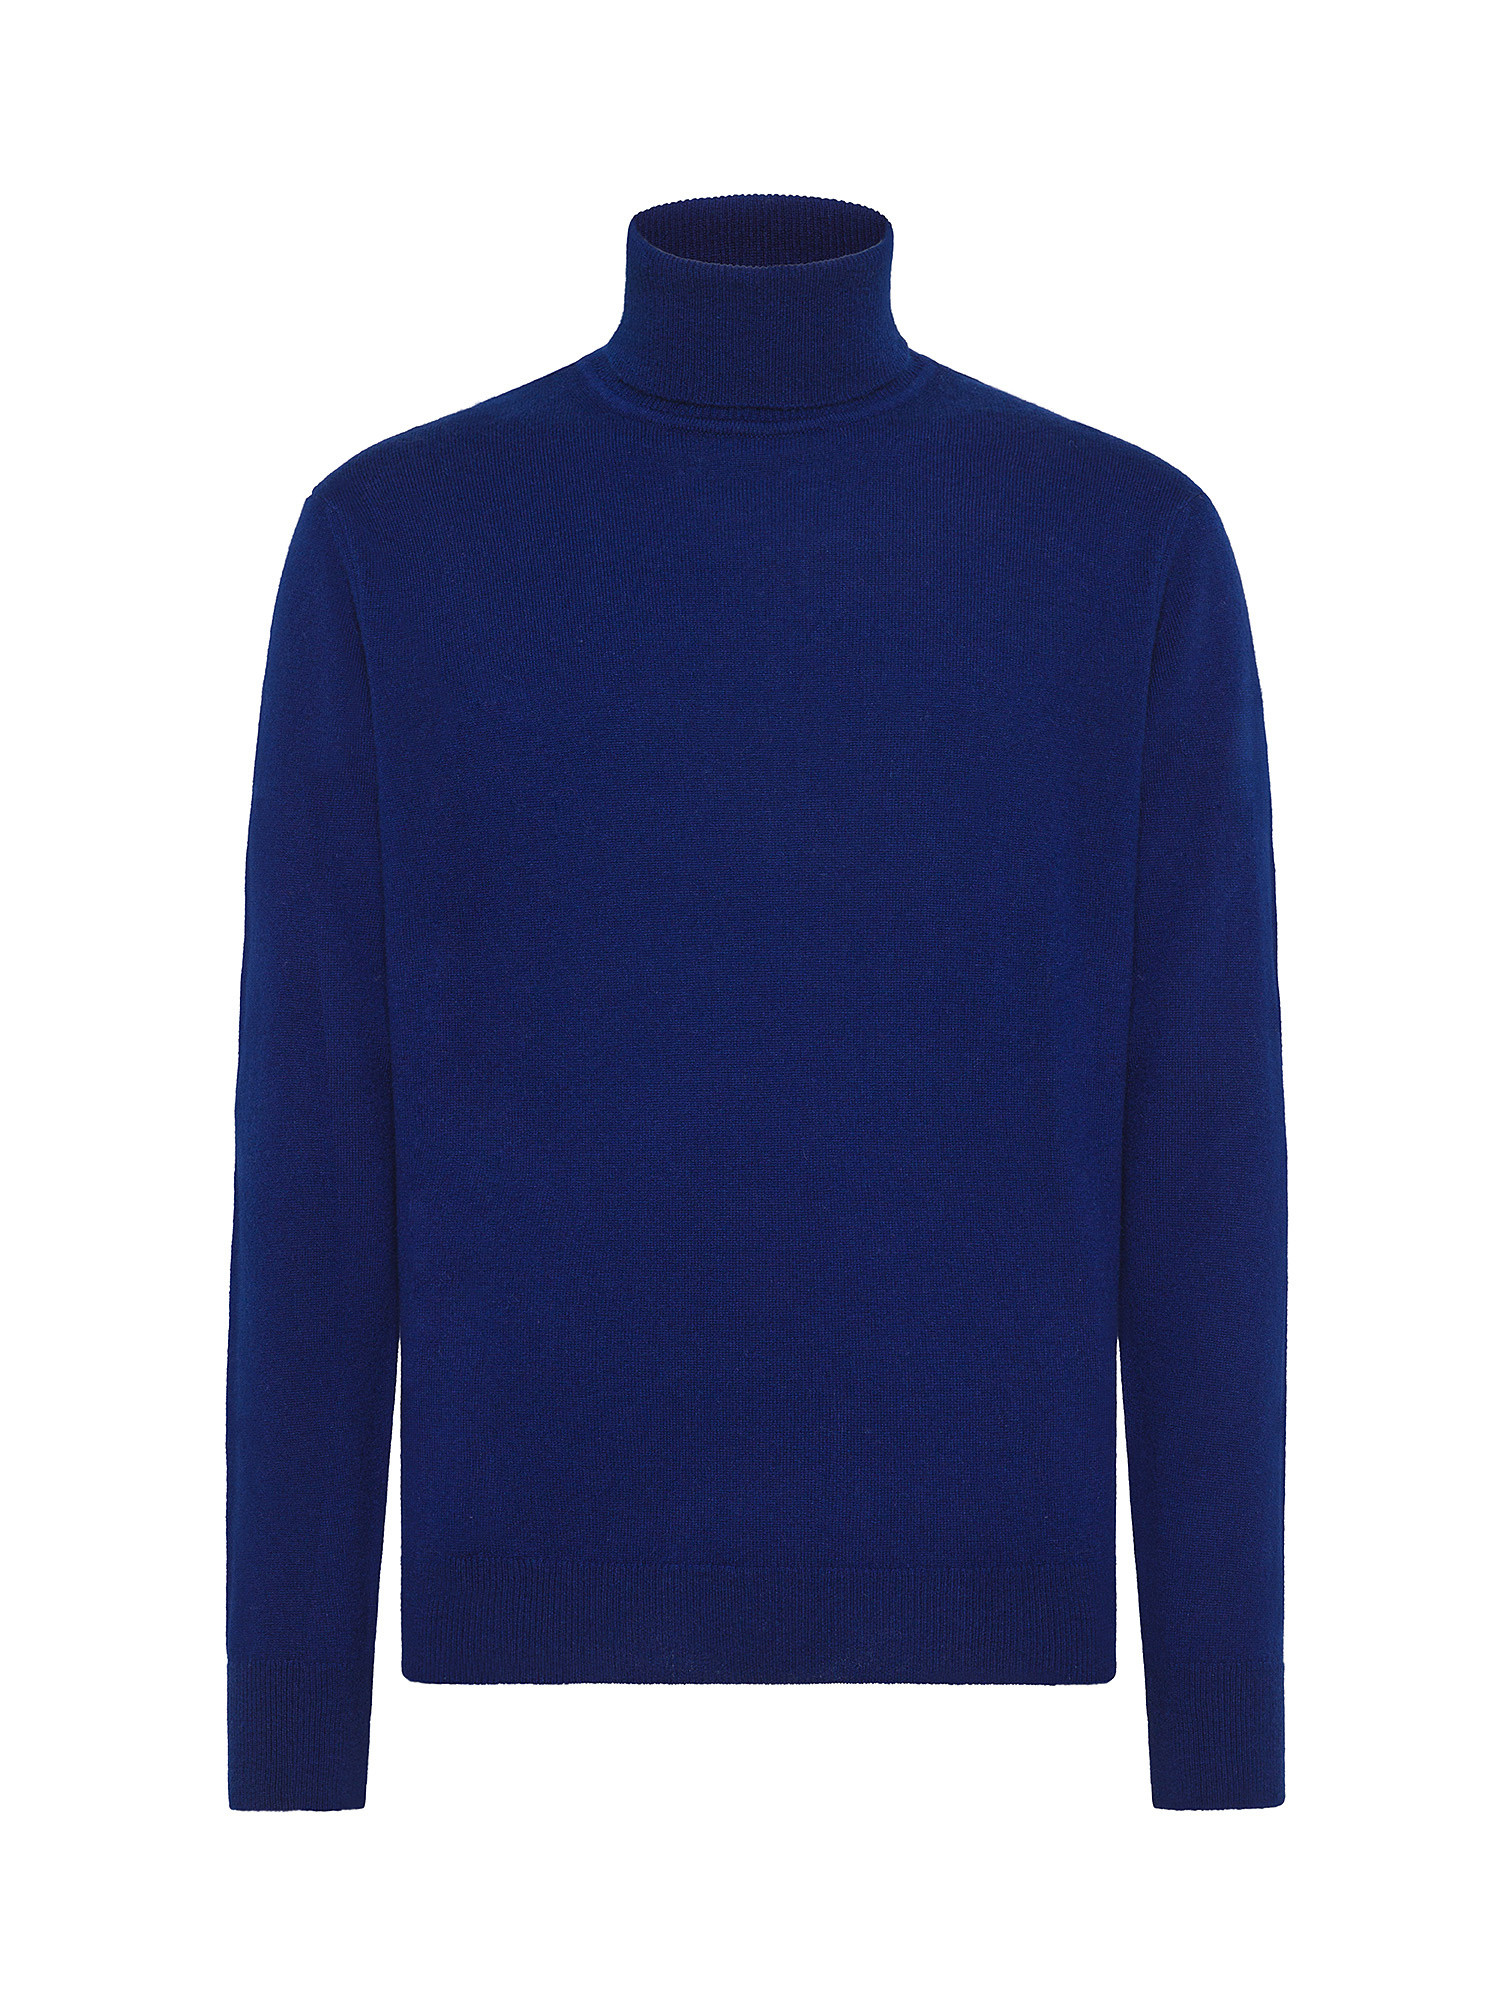 Coin Cashmere - Turtleneck in pure premium cashmere, Royal Blue, large image number 0